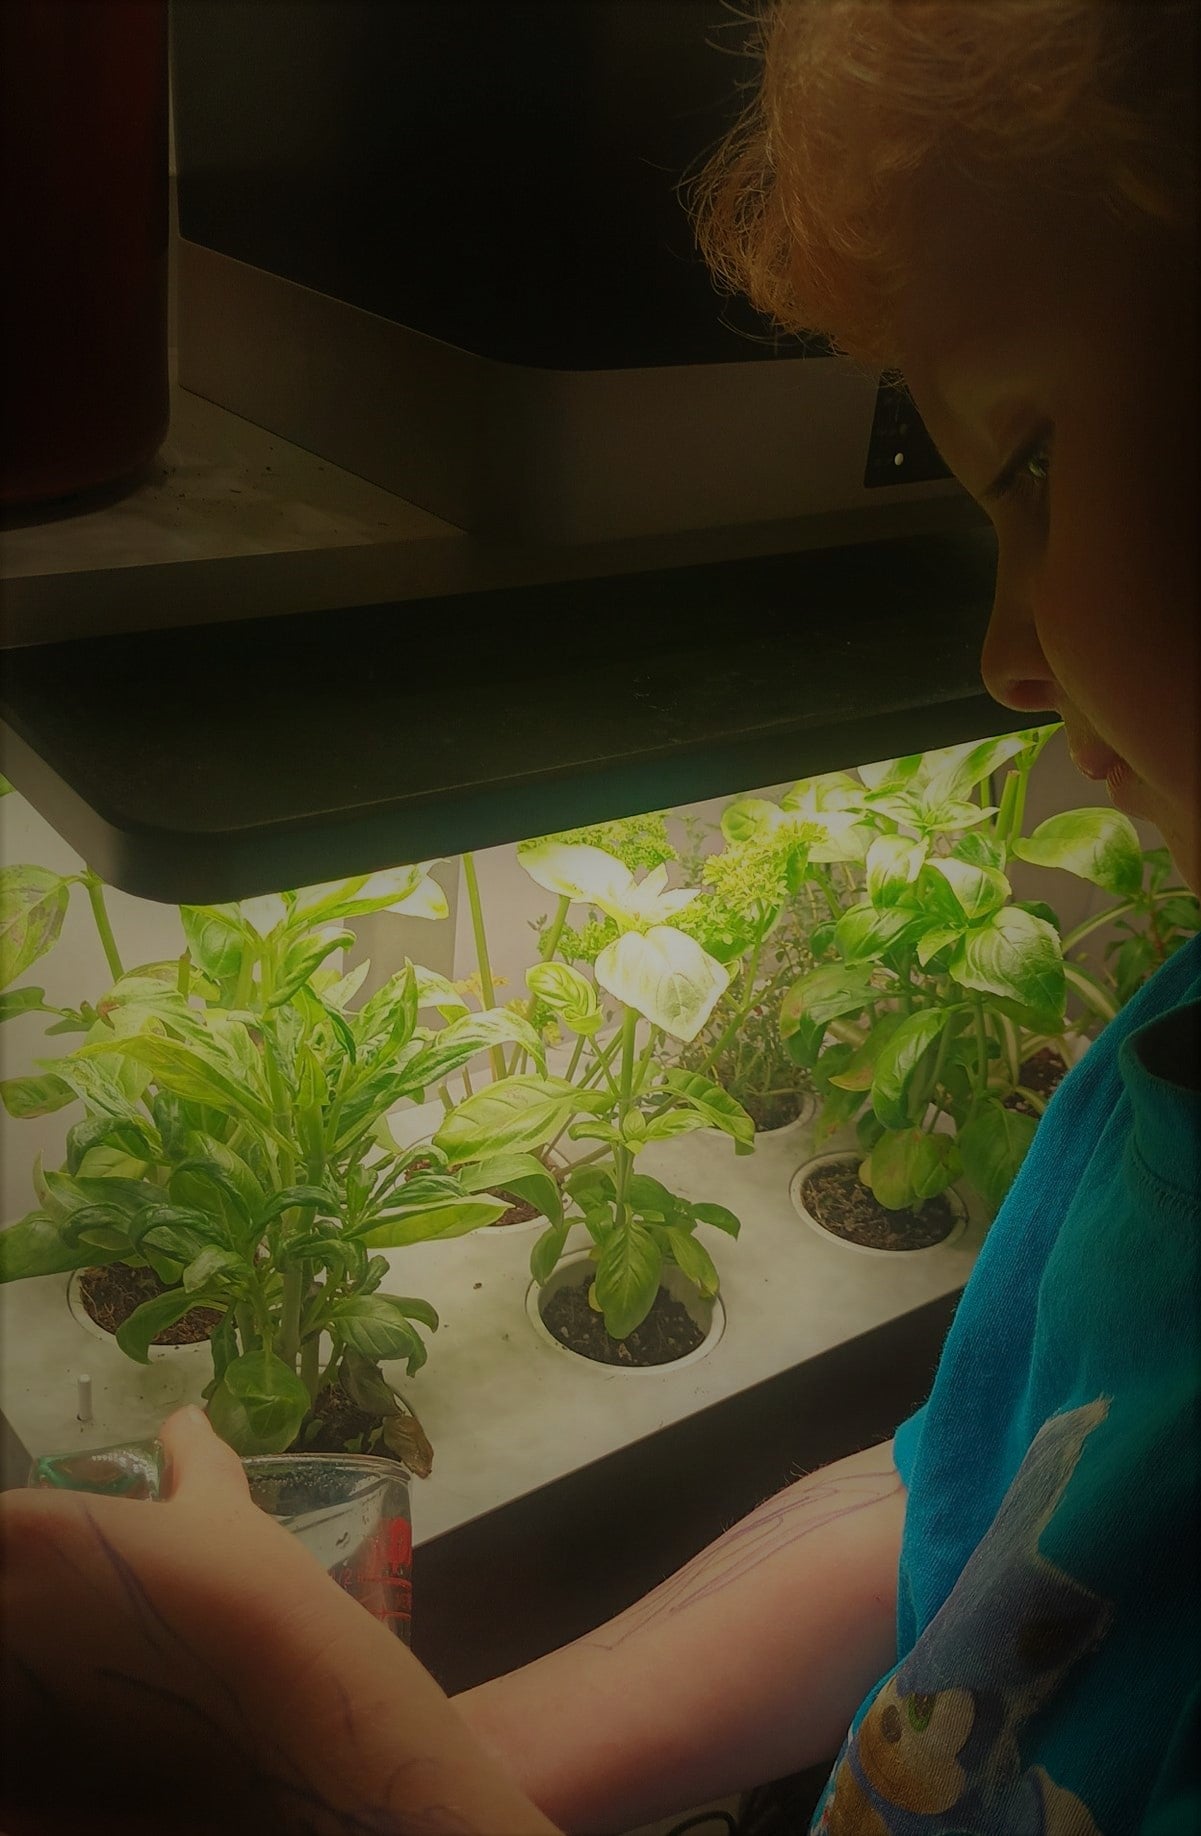 A child with a joyful expression tending to an indoor hydroponic garden, nurturing herbs with care and curiosity. They delicately water the plants, ensuring the roots receive the nutrient-rich solution. Sun-kissed leaves thrive under LED grow lights, symbolising a rewarding journey of learning, growth, and sustainable gardening.